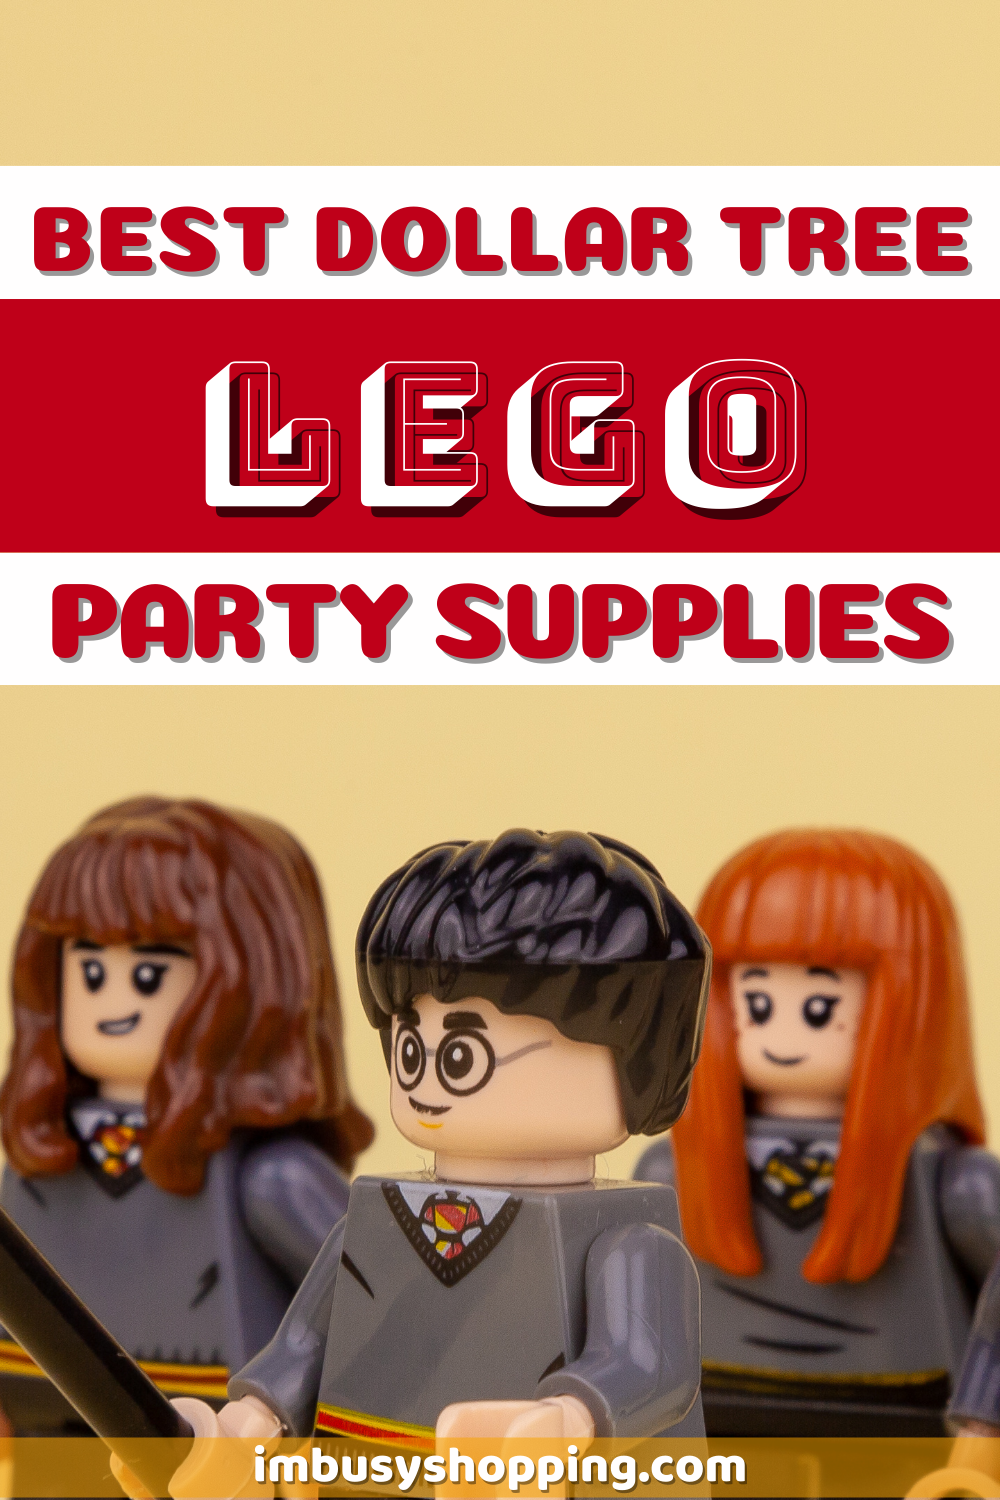 Harry Potter character legos on yellow background with title "Best Dollar Tree Lego Party Supplies"